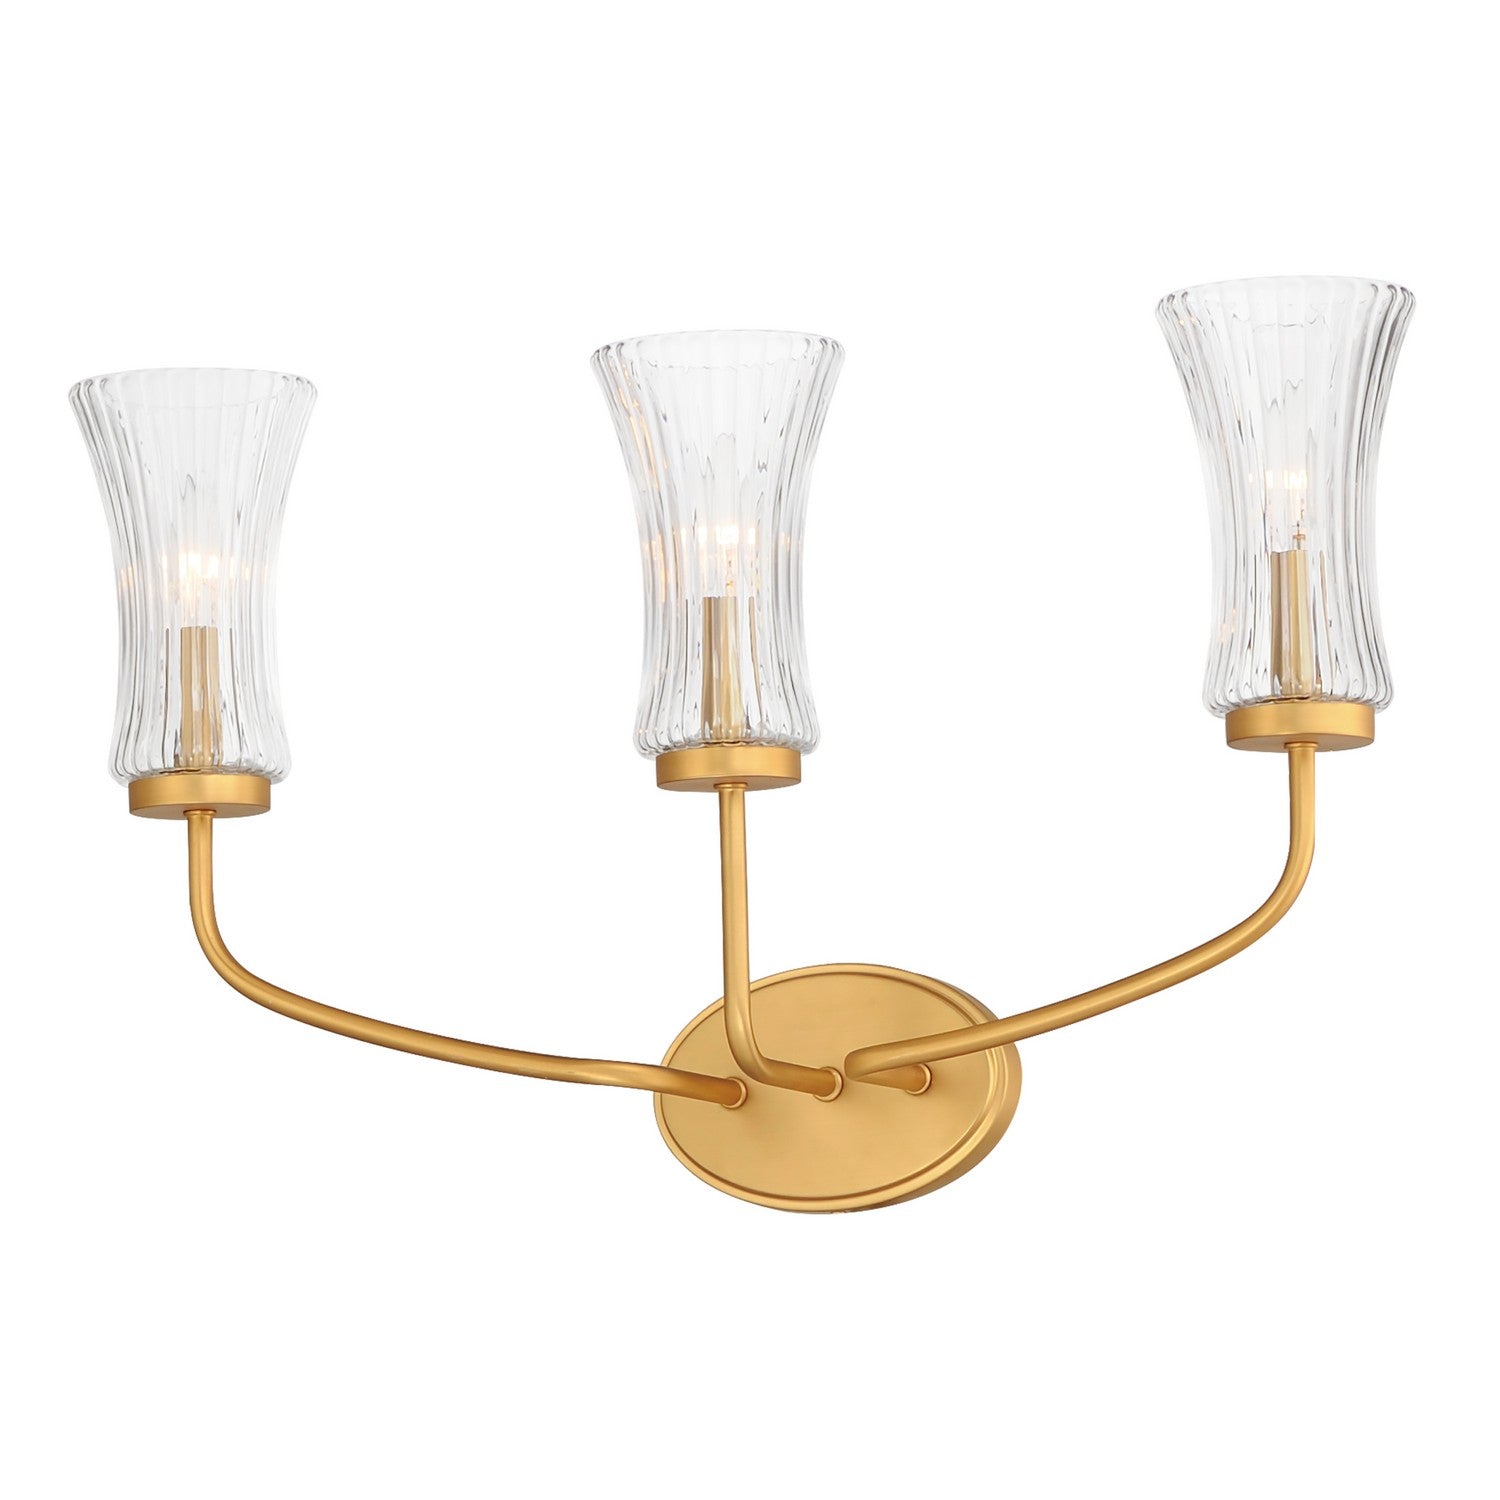 Maxim - 16153CRNAB - Three Light Wall Sconce - Camelot - Natural Aged Brass